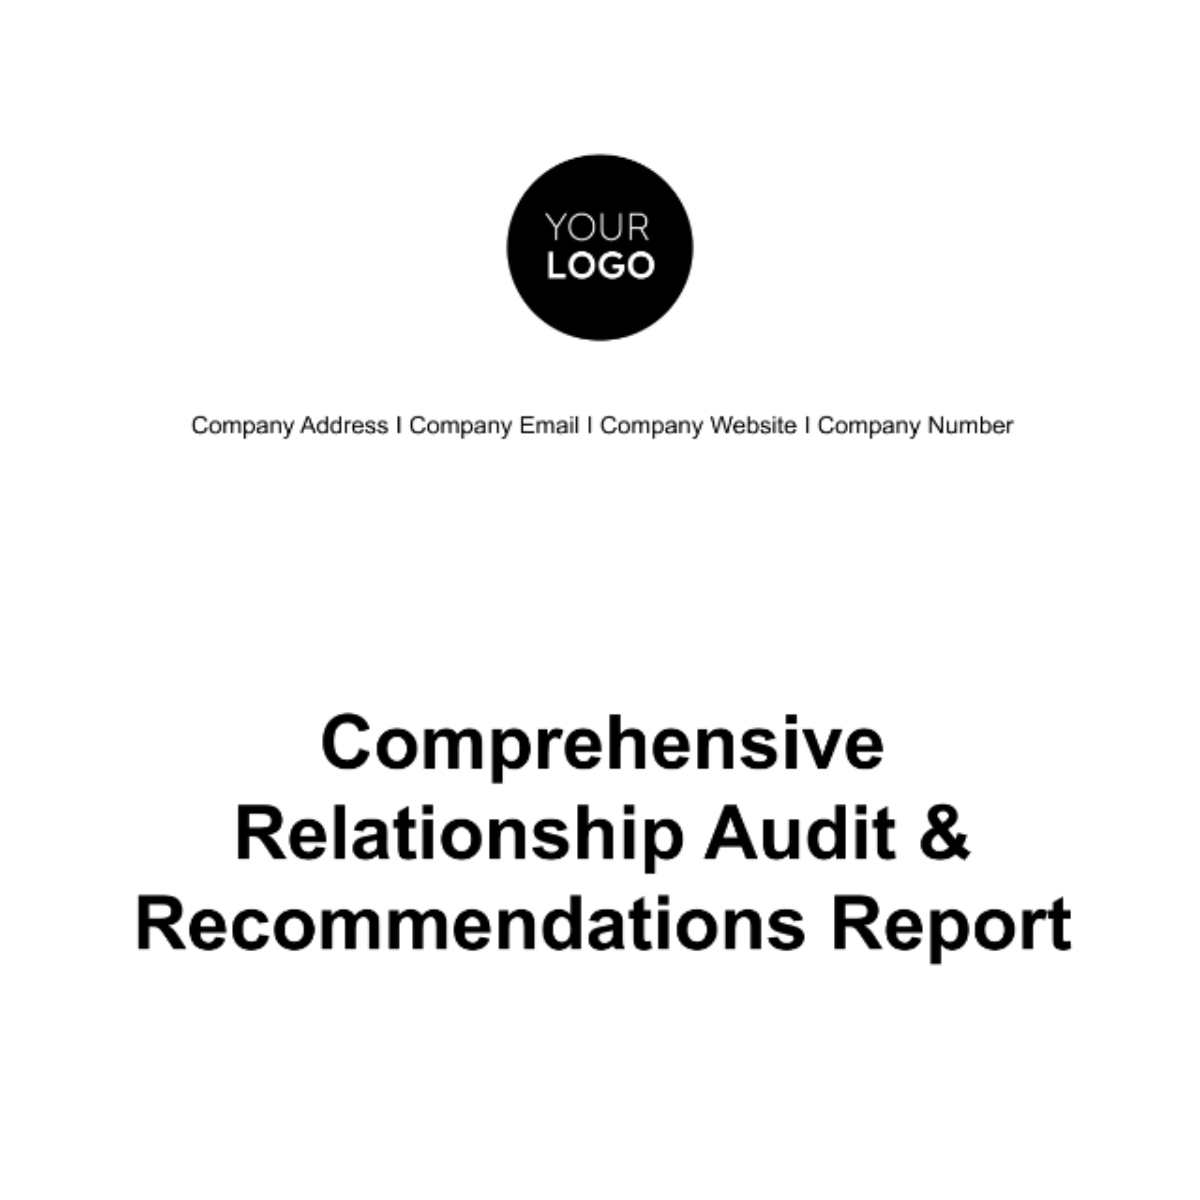 Free Comprehensive Relationship Audit & Recommendations Report HR Template